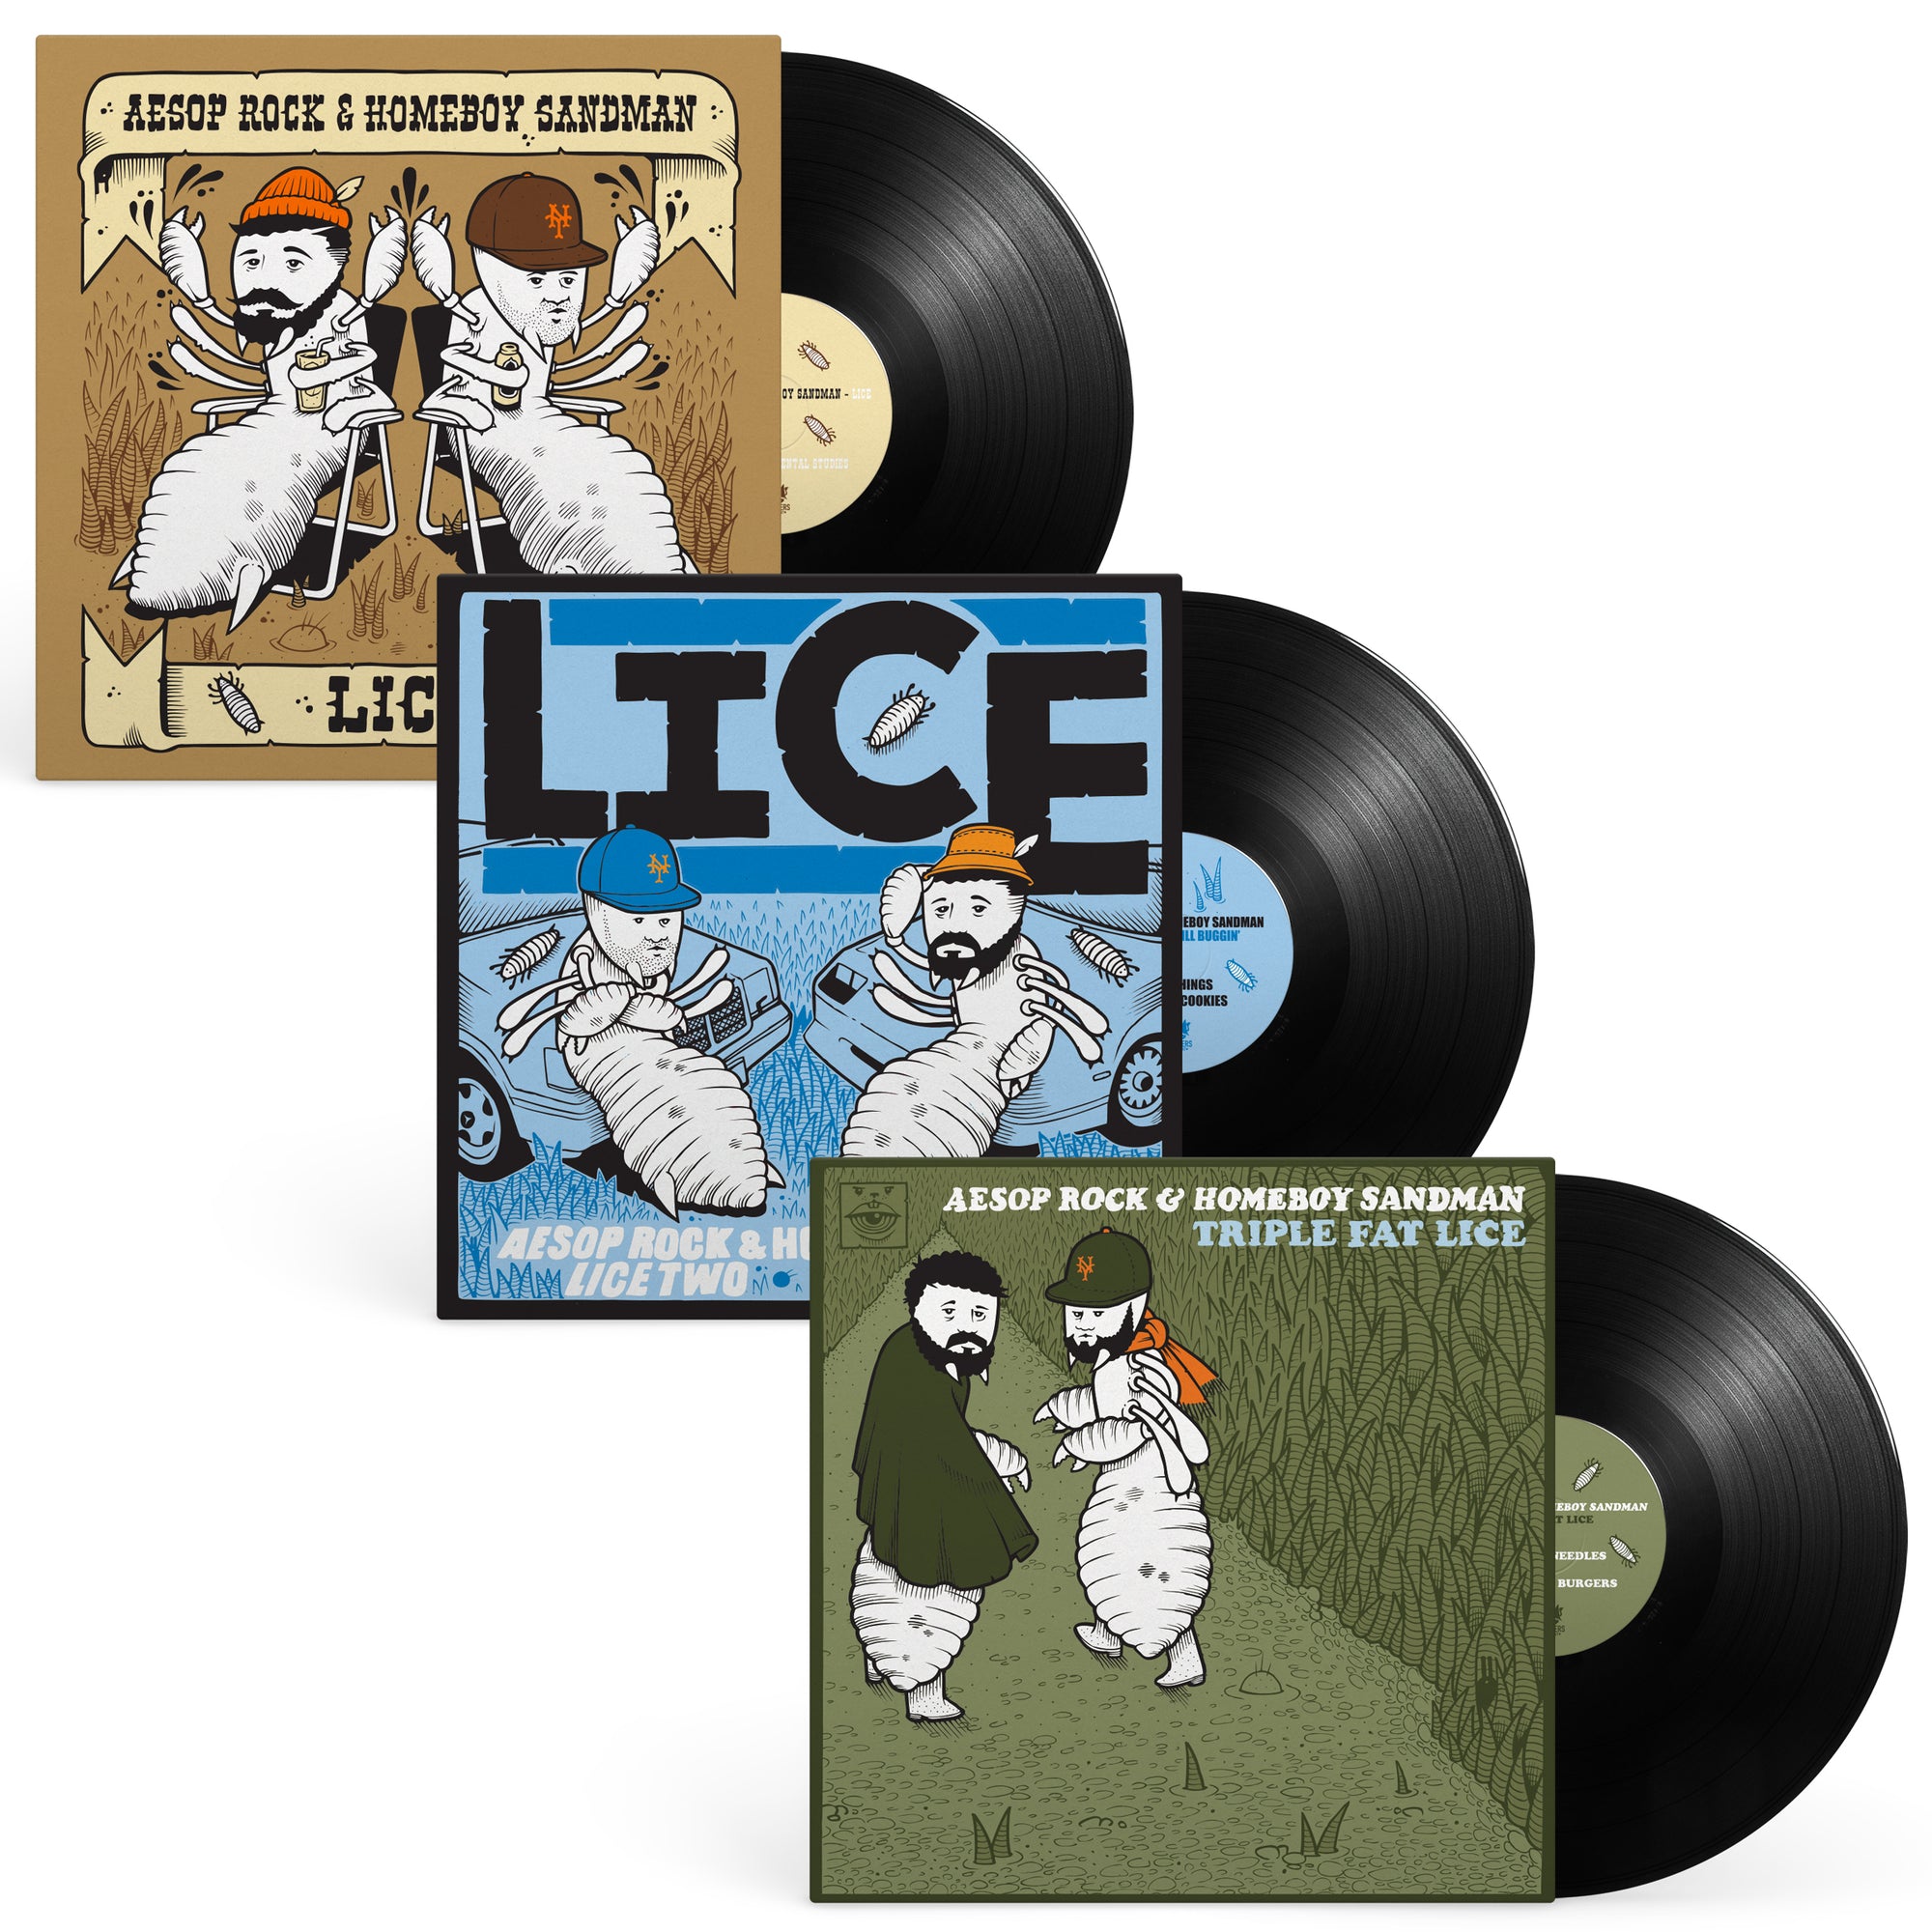 Check your head! Lice (Aesop Rock + Homeboy Sandman) EPs 1-3 are now streaming!